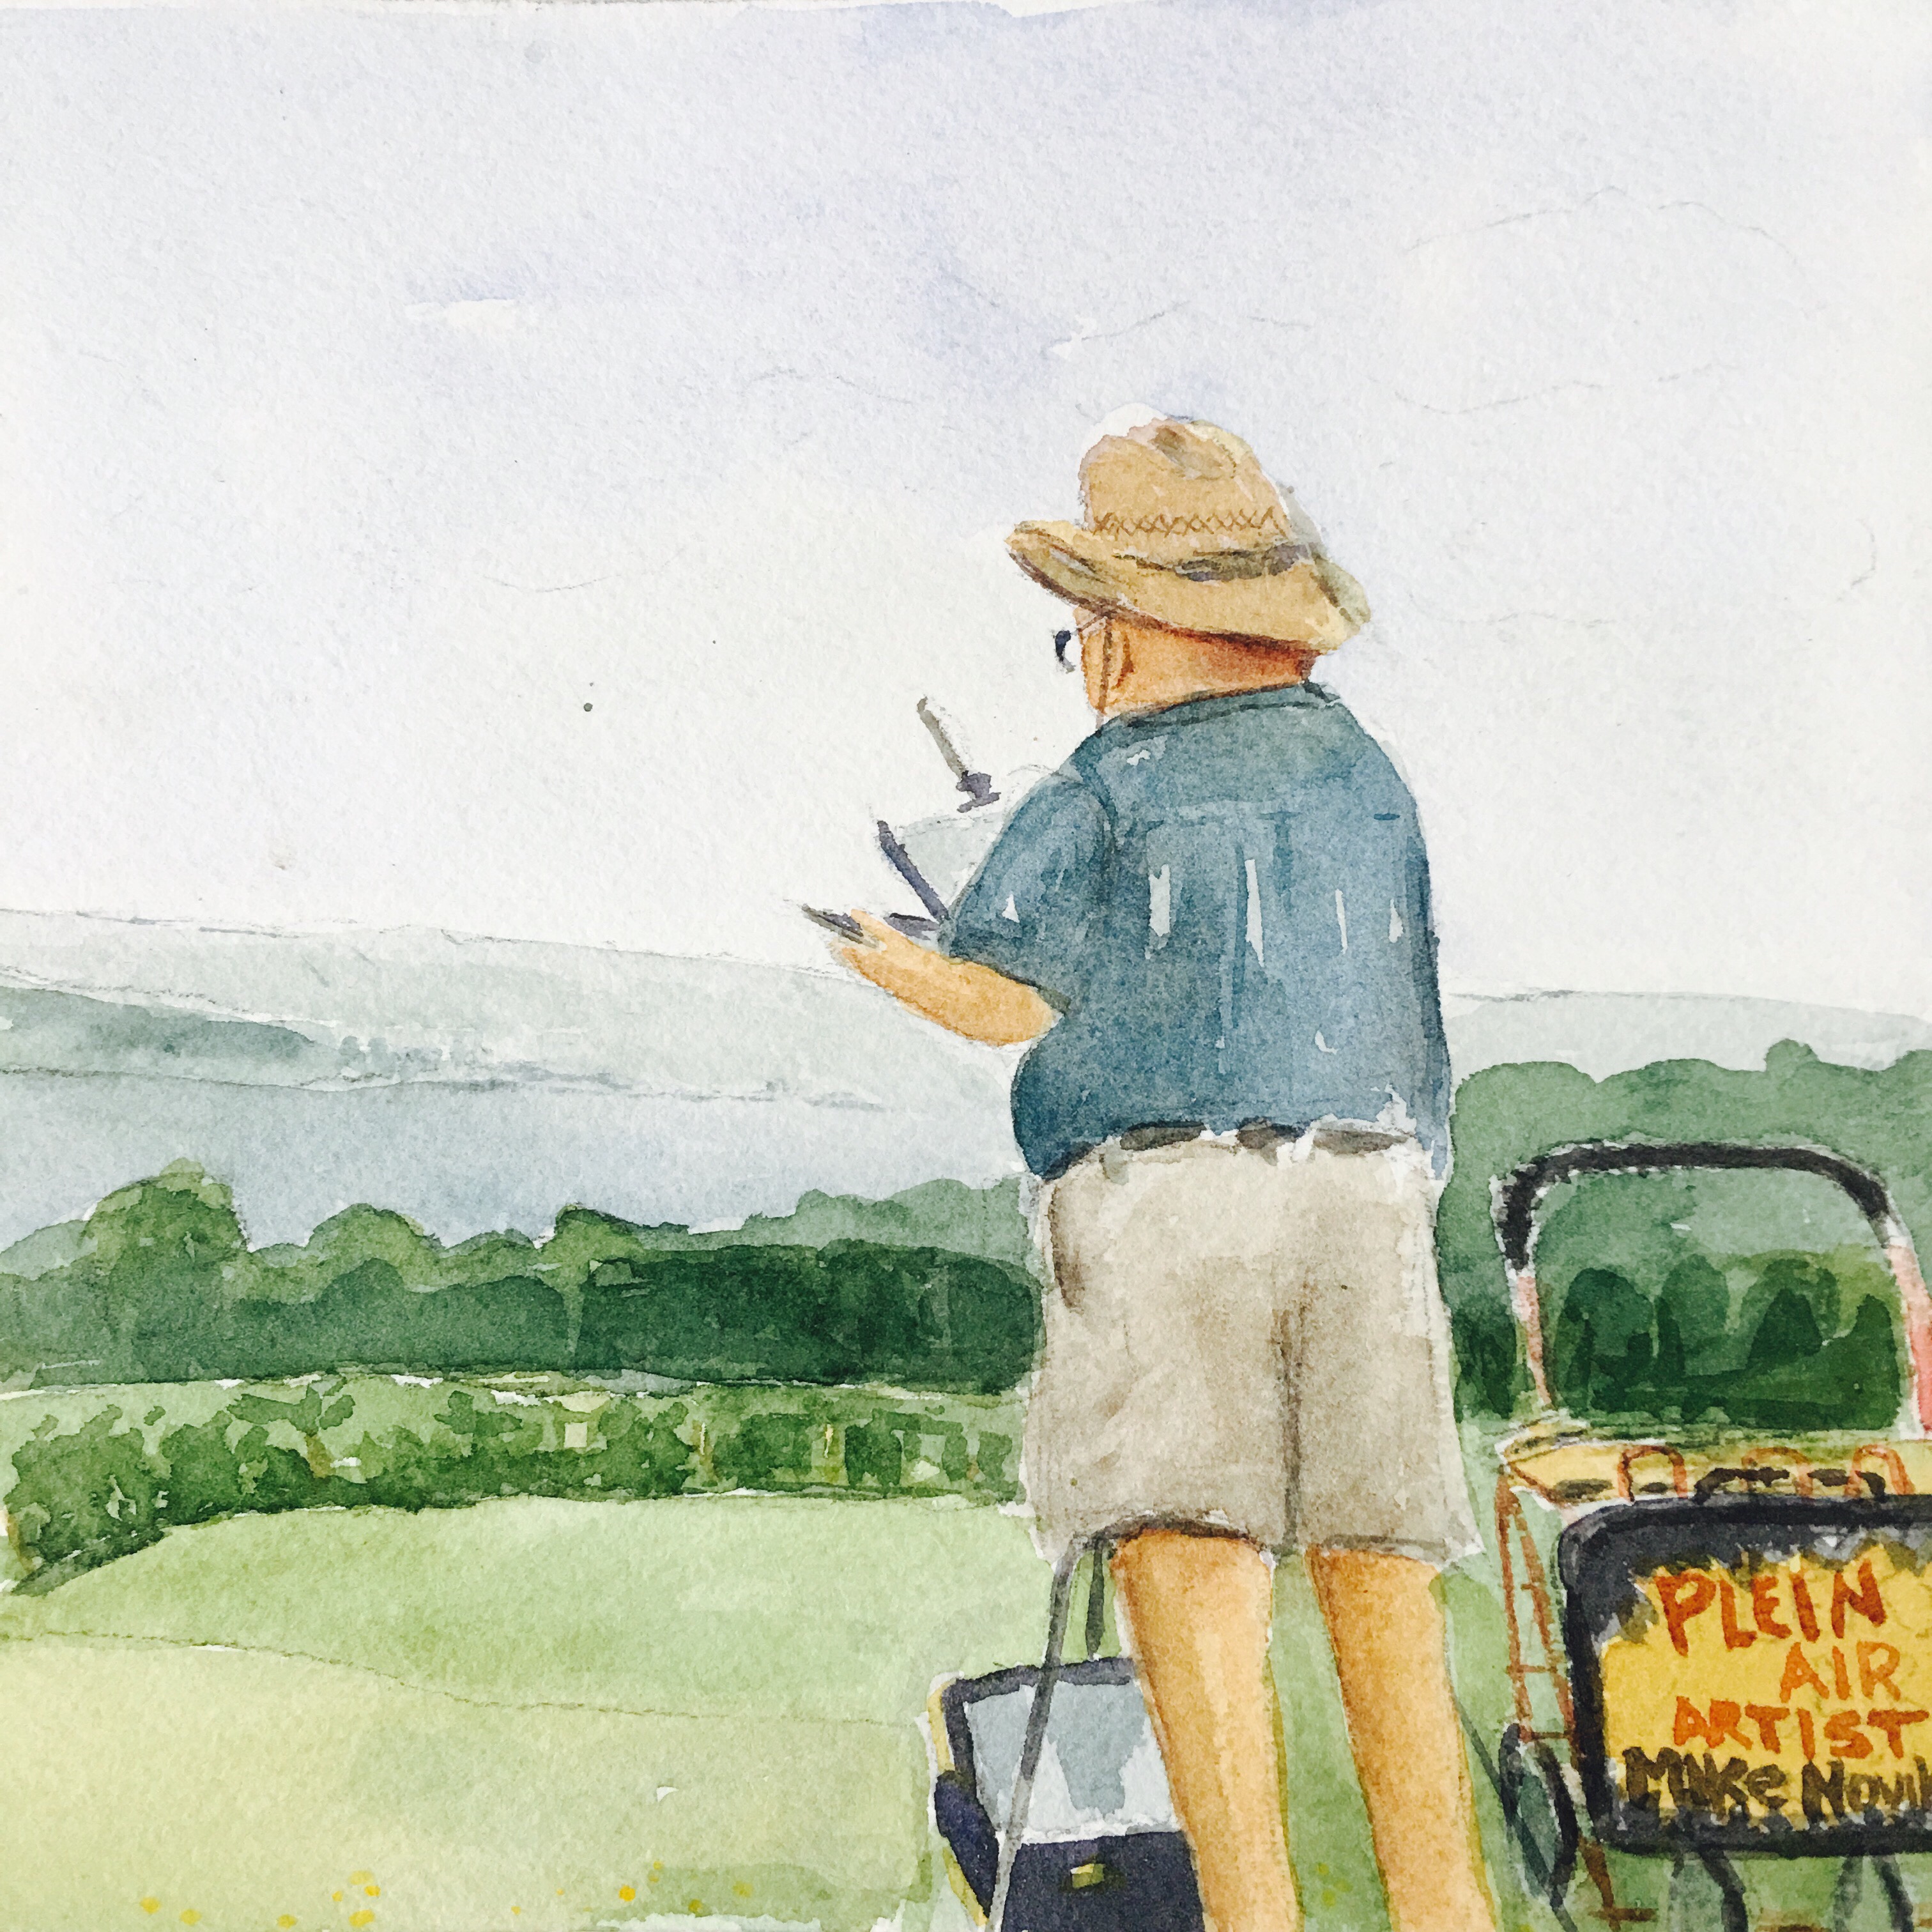 Mike painting Plein Air at one of the Finger Lakes wineries. 